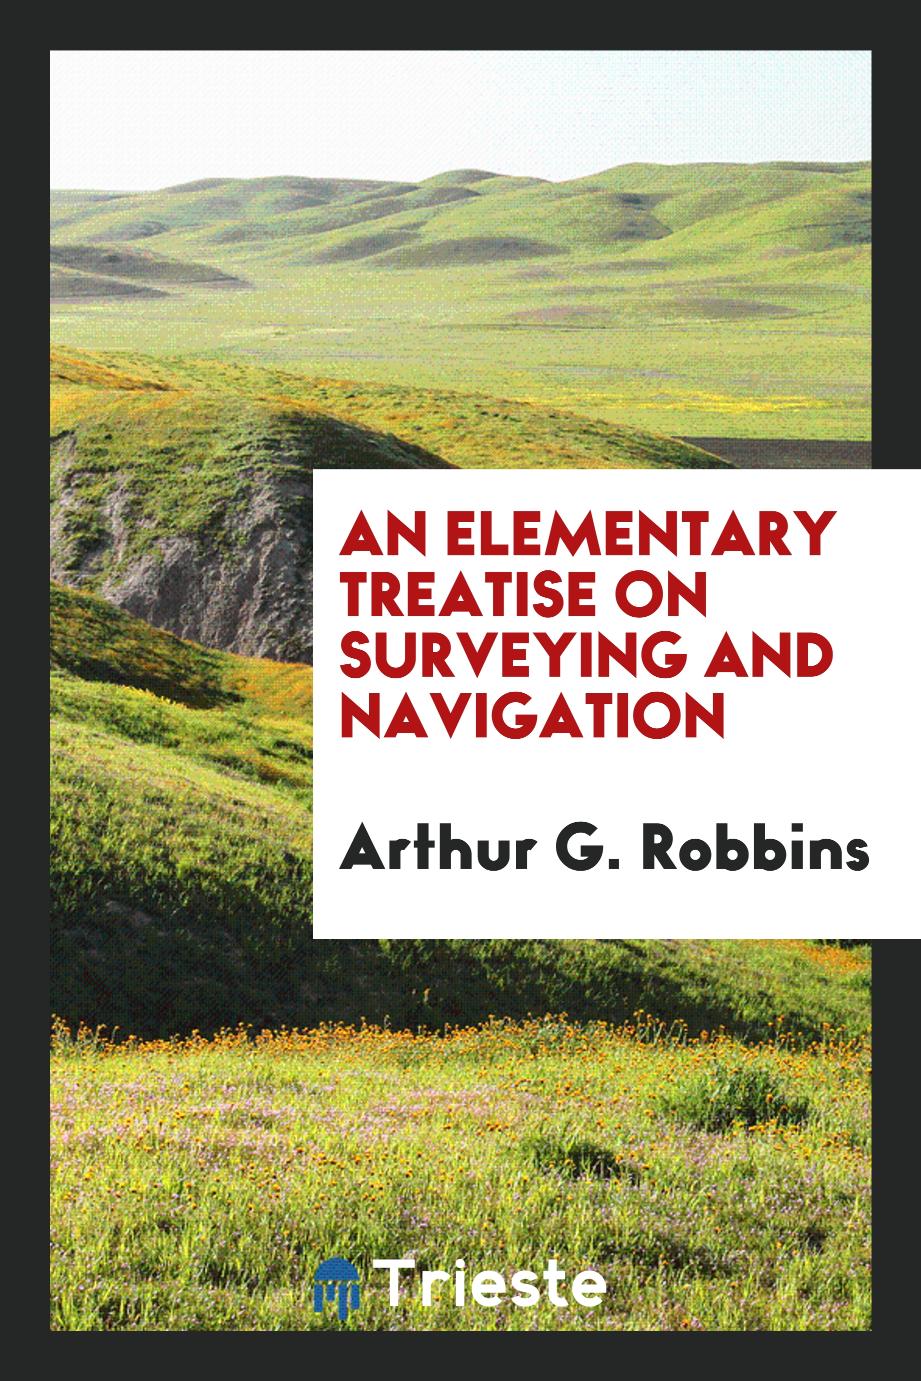 An Elementary Treatise on Surveying and Navigation